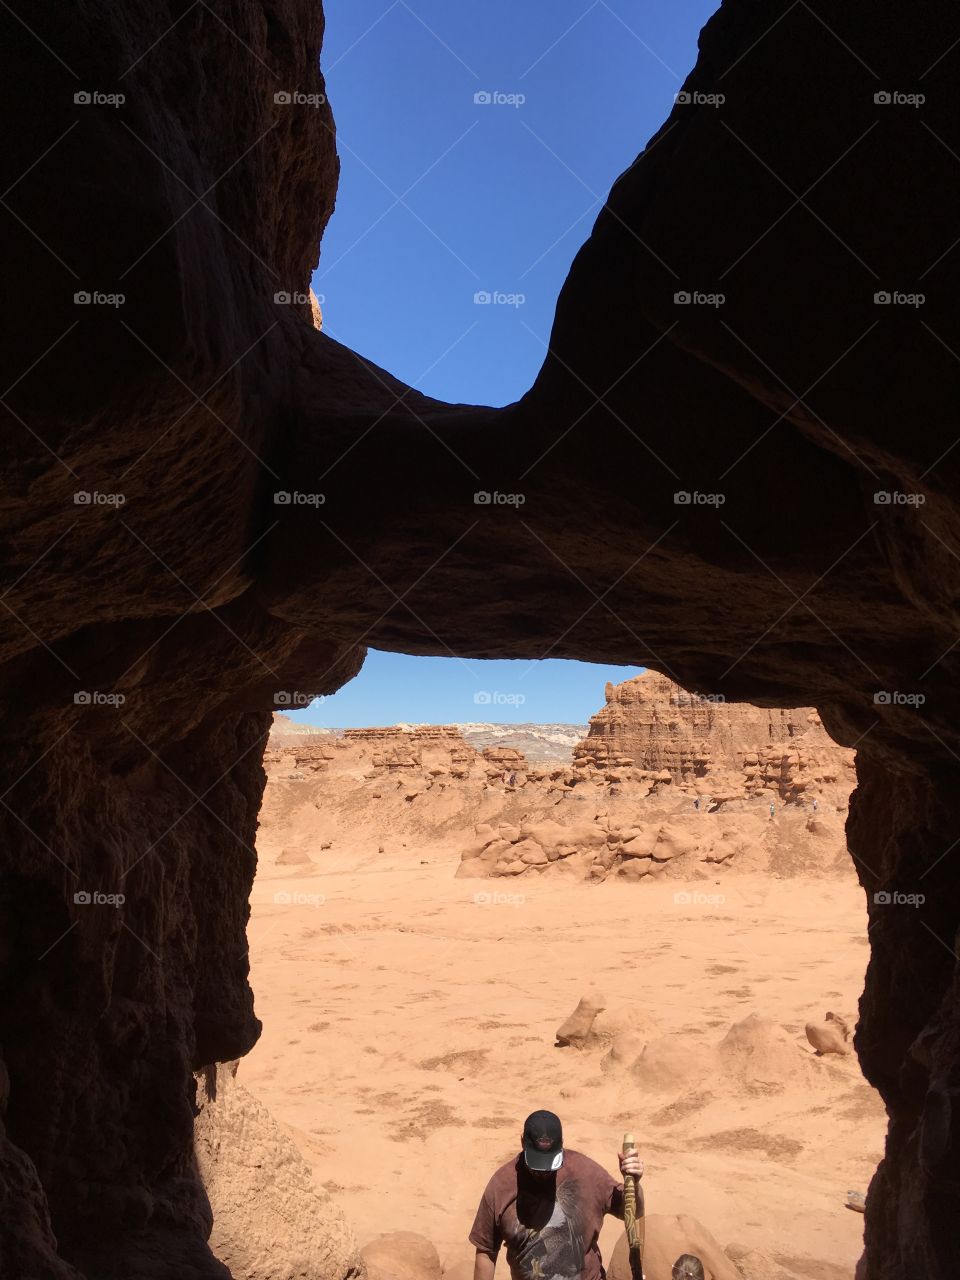 Looking out a cave window in Goblin Valley, Utah.